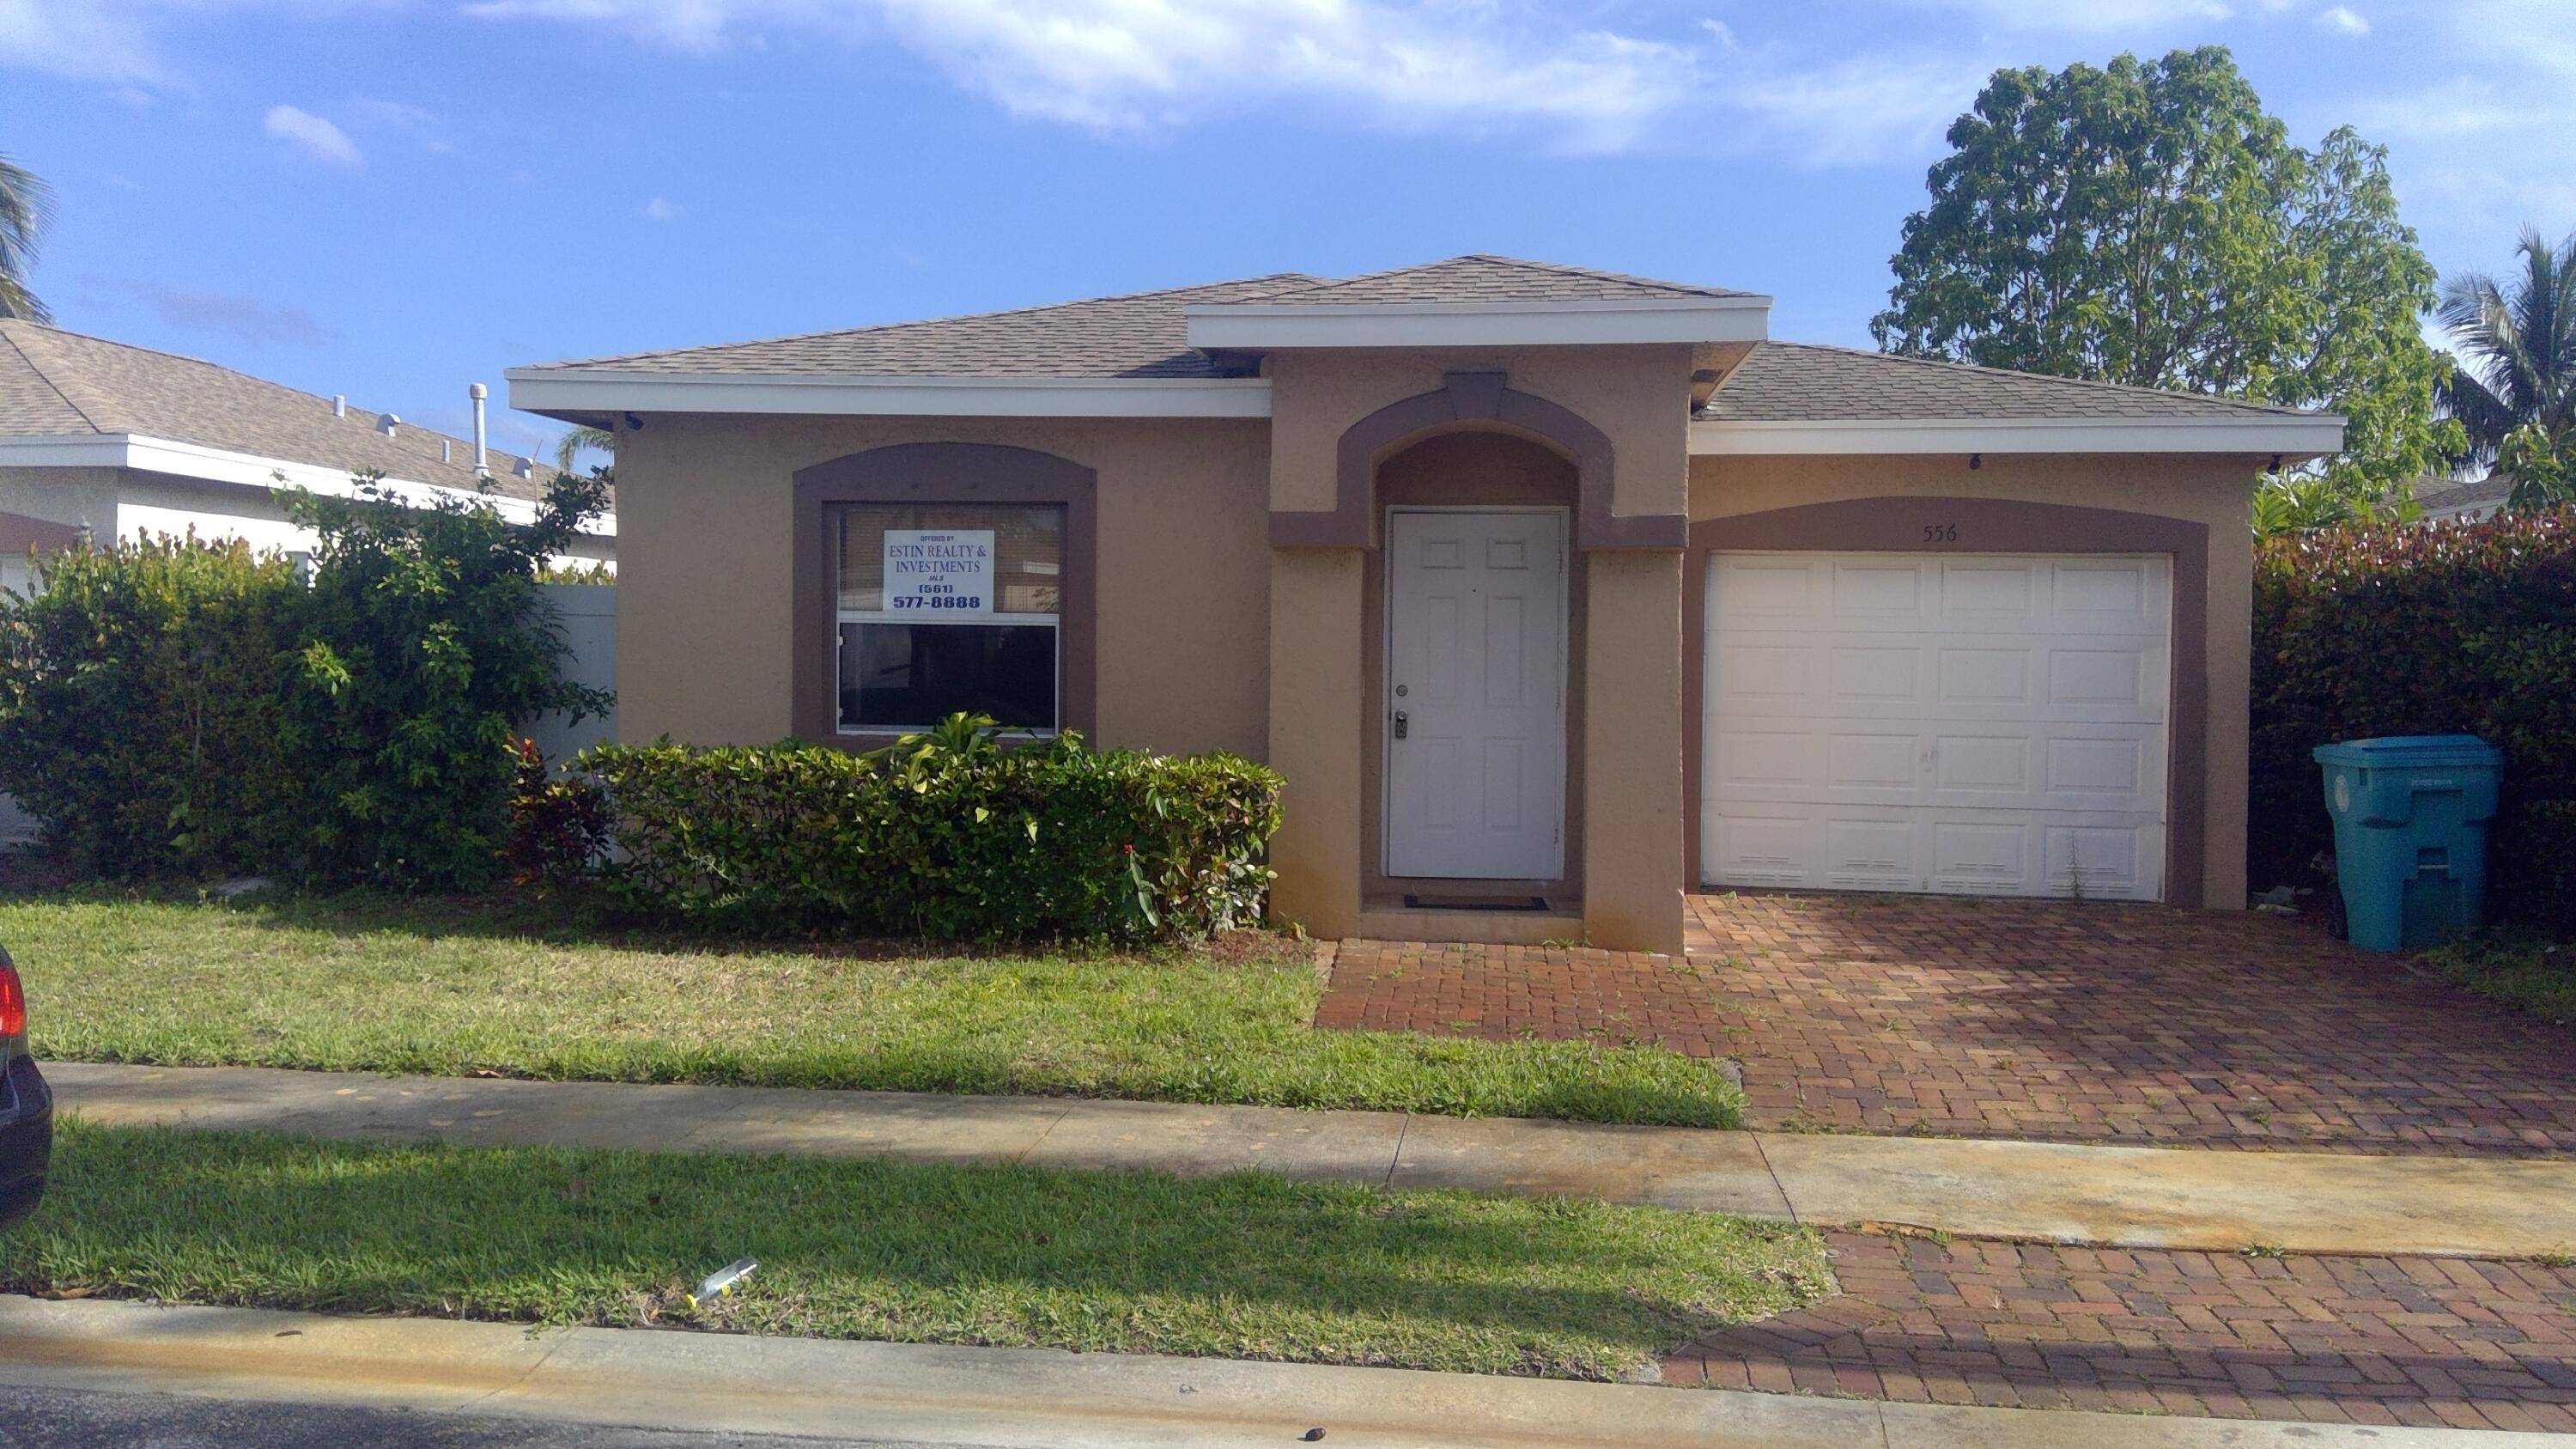 This property is a well maintained 3 bedroom, 2 bathroom, 1 car garage, located just minutes away from I 95, local shopping centers, the beach and walking distance from the ...